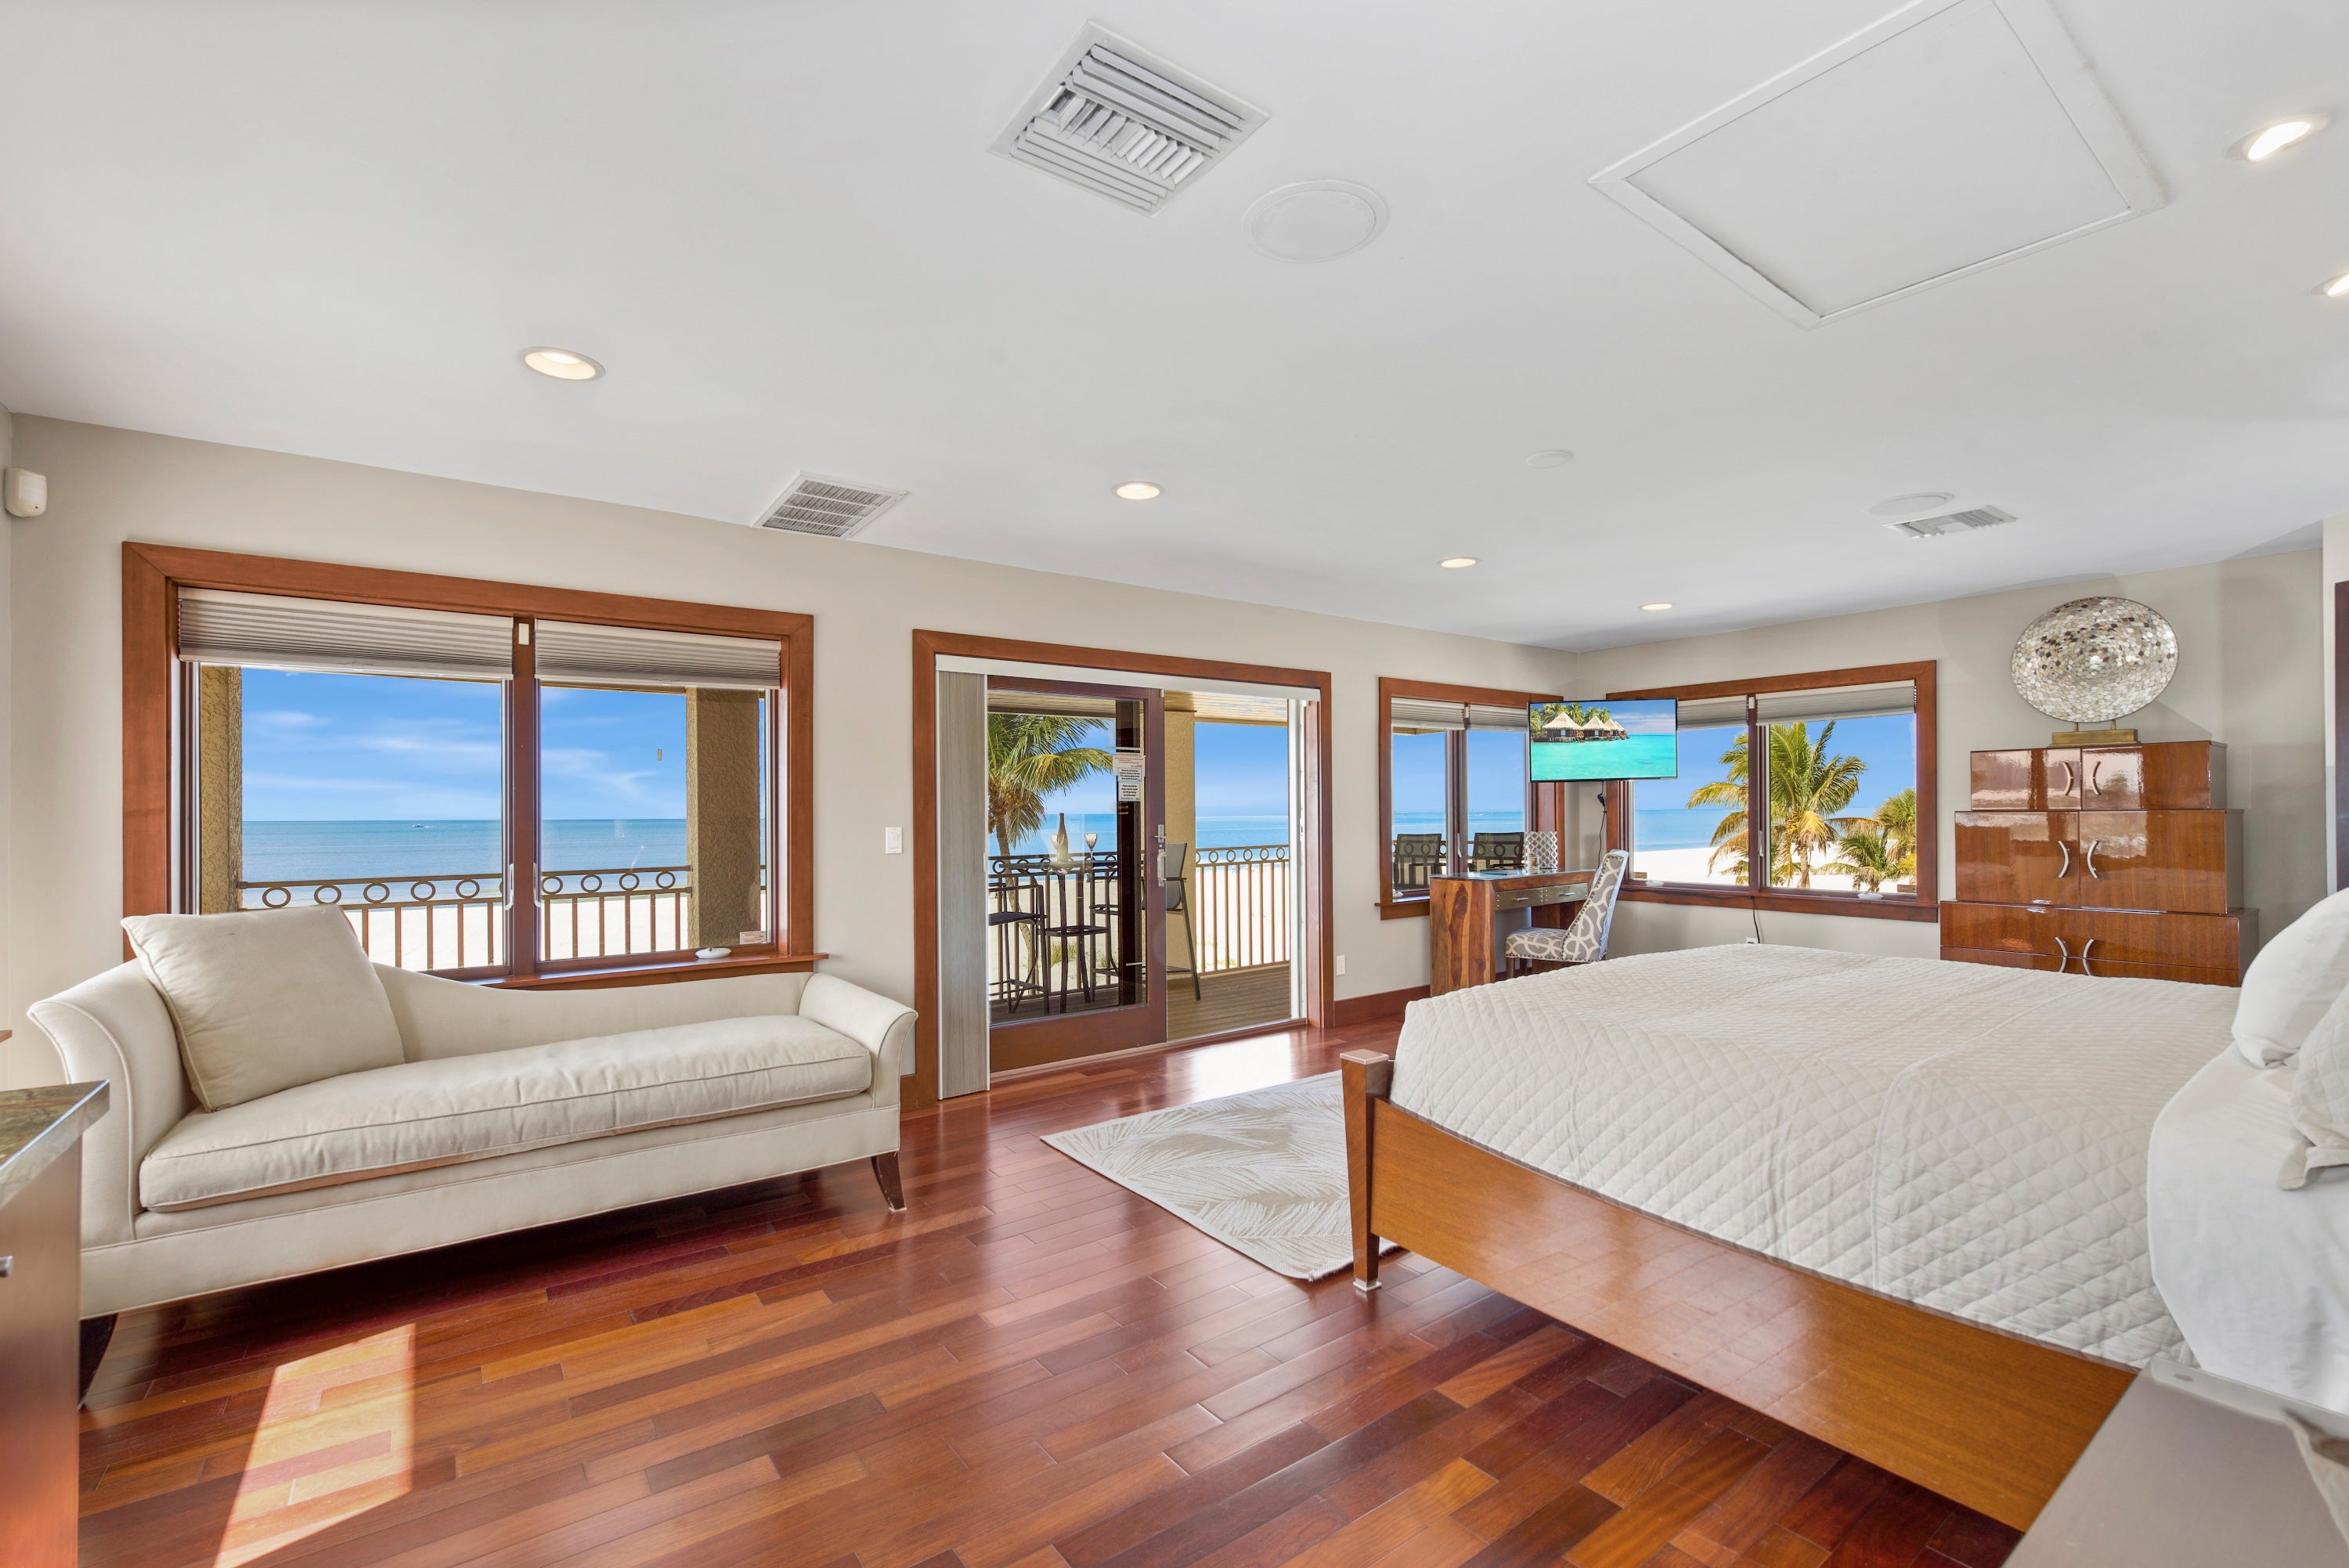 Primary Suite with Beach View